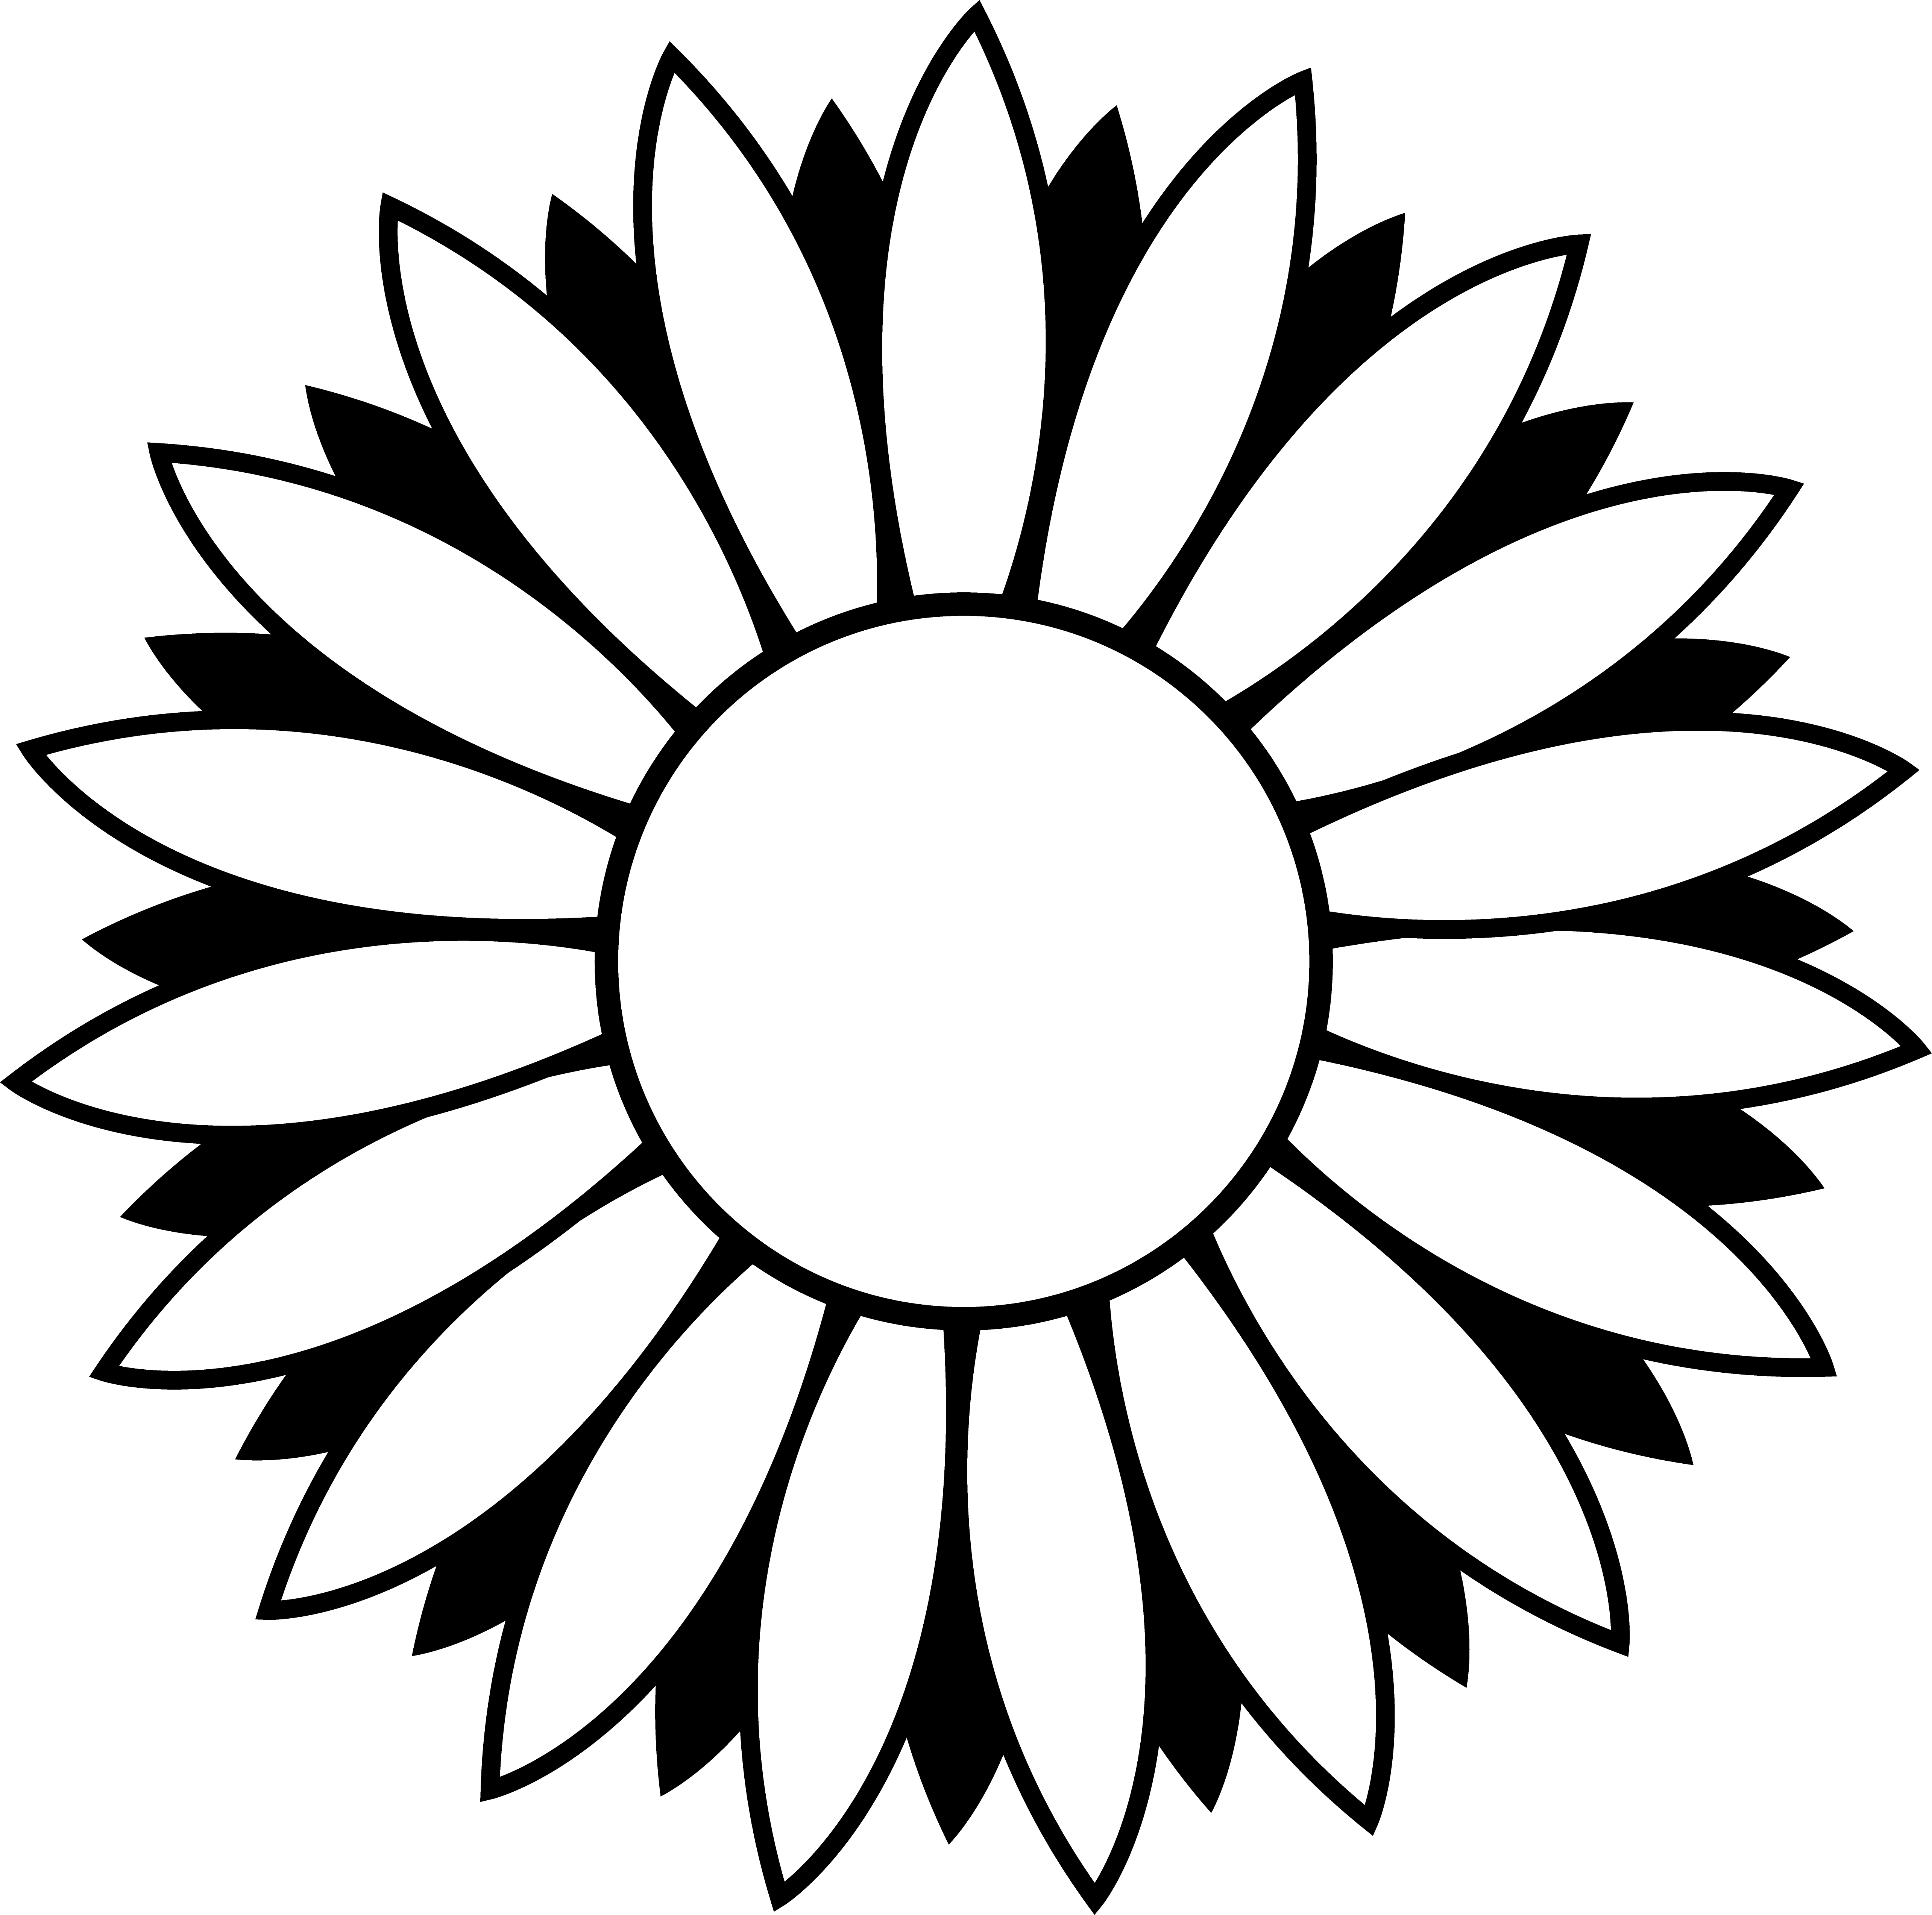 Black And White Sunflower Photography | Clipart Panda - Free ...